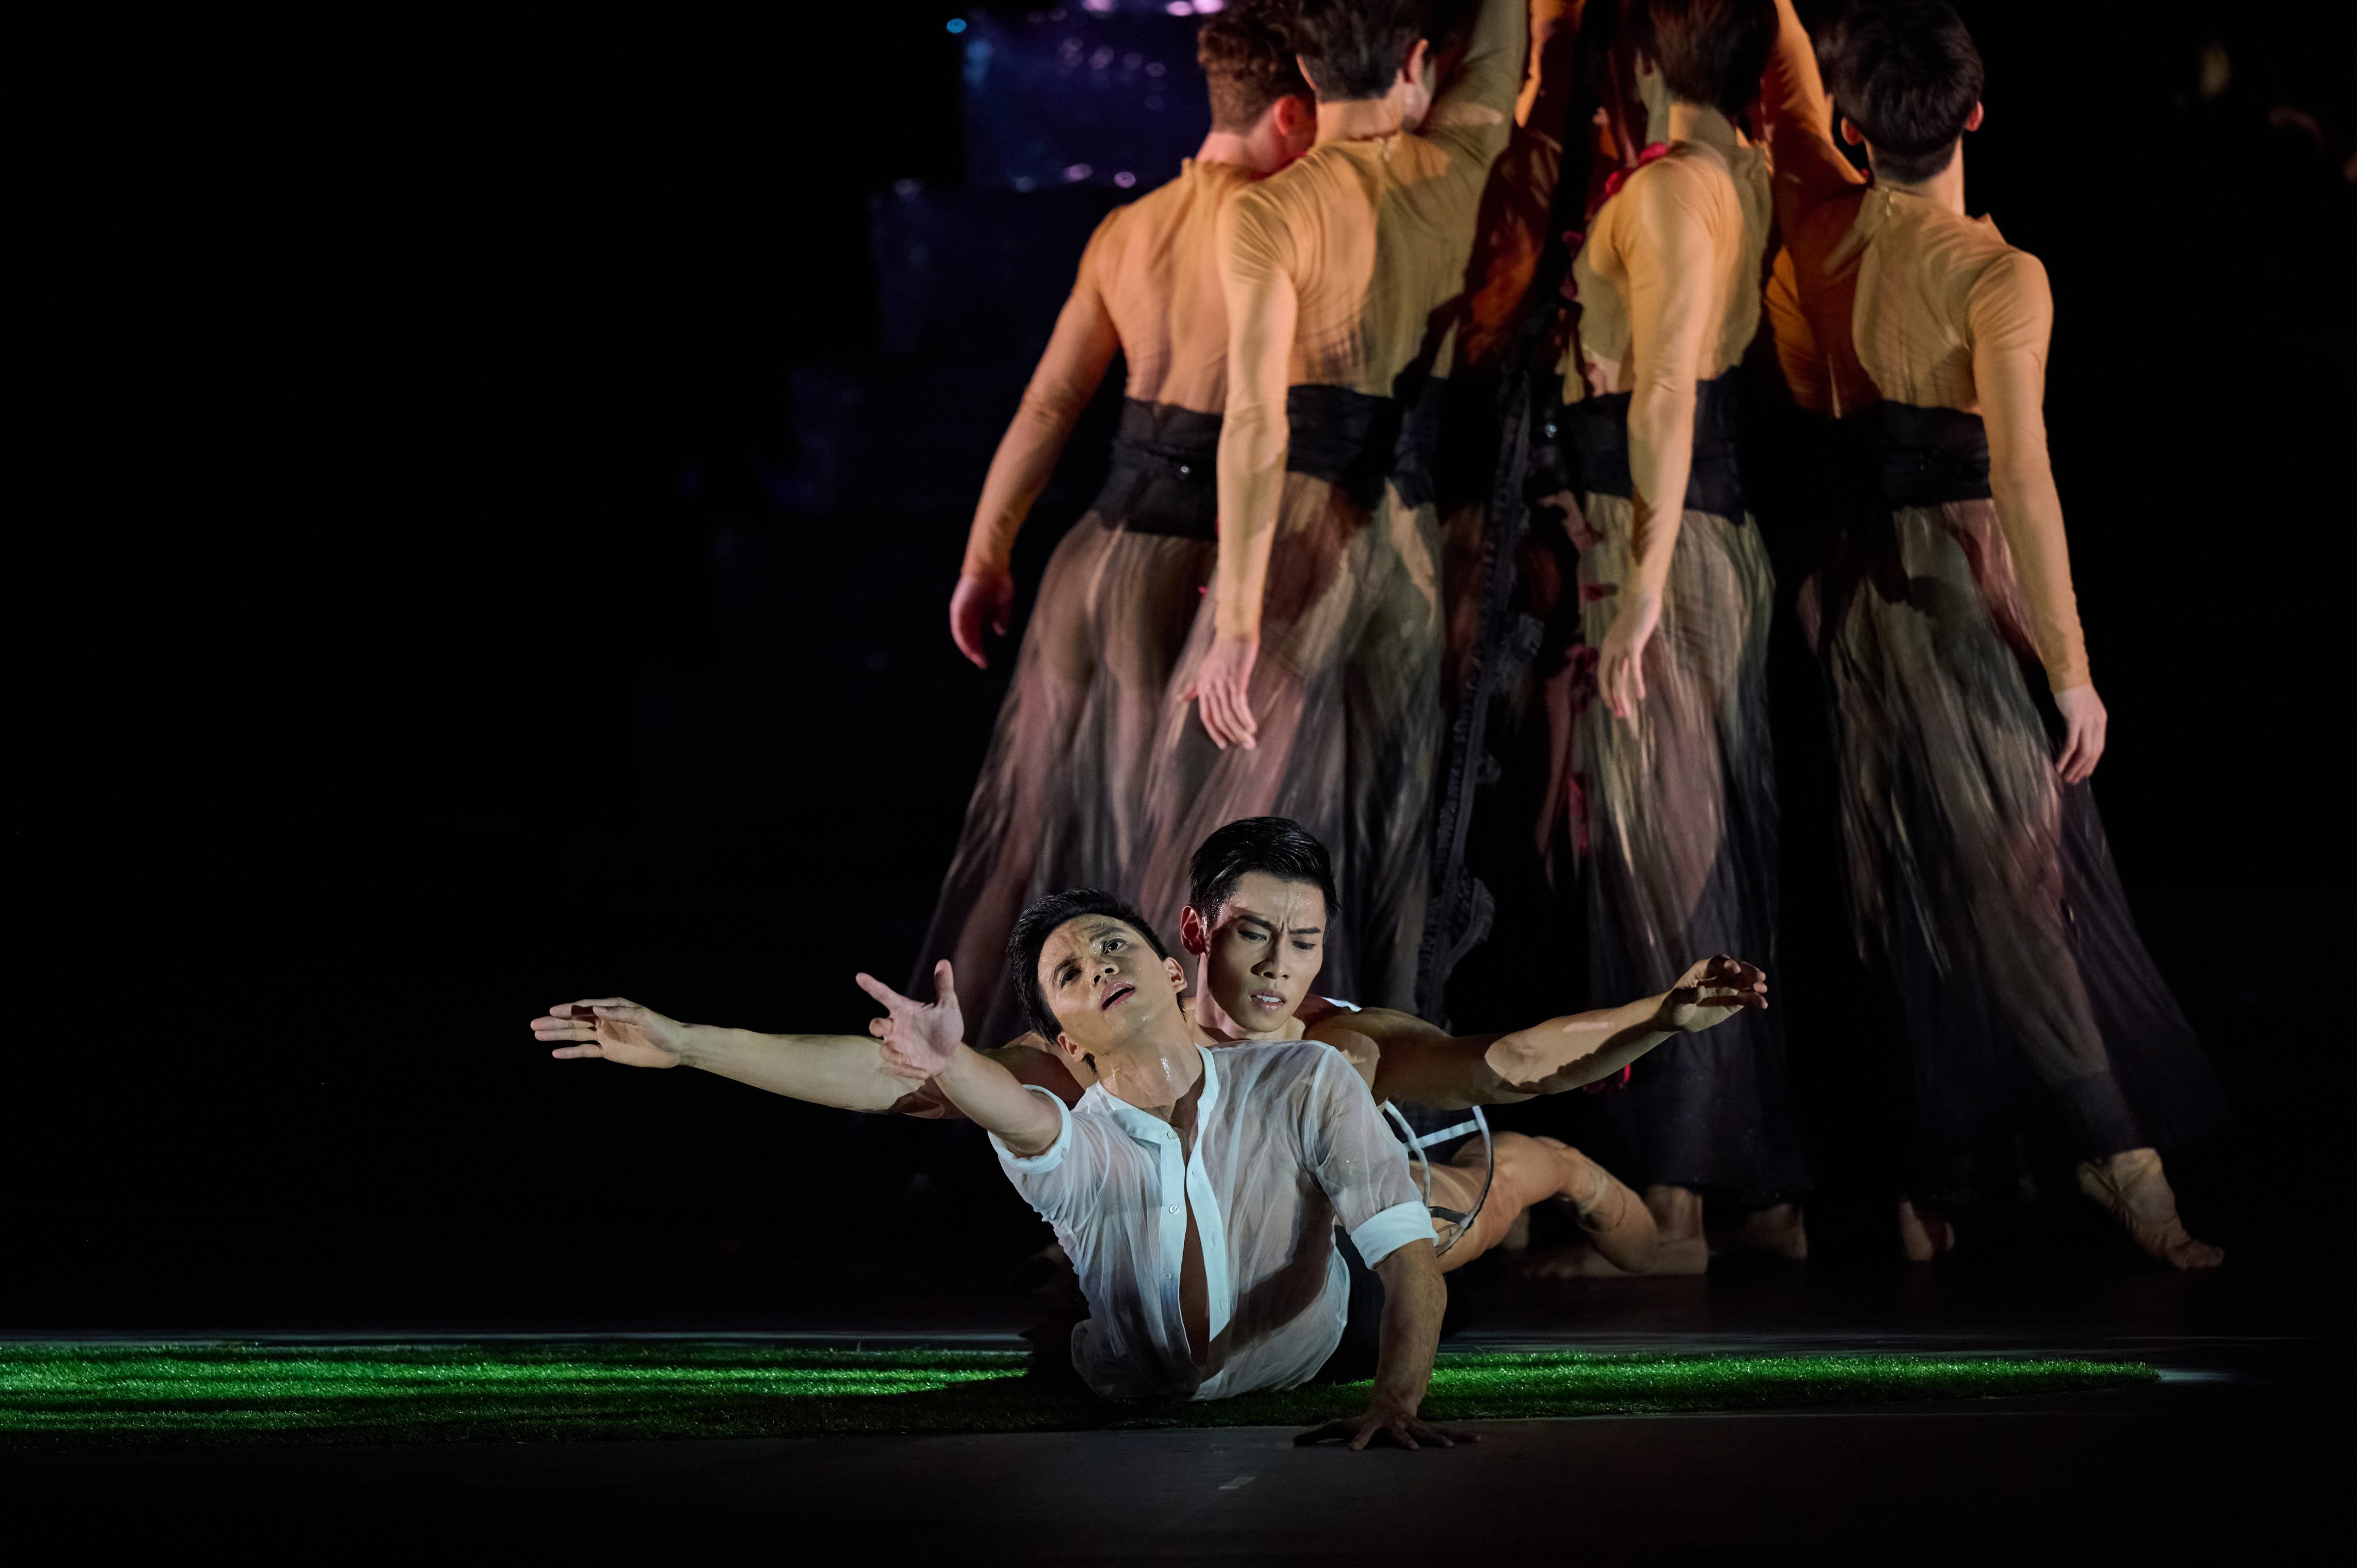 Luis Cabrera (left) and Kyle Lin (right) in a scene from “The Last Song”, choreographed by Ricky Hu and part of “Carmina Burana”, a double bill from the Hong Kong Ballet and Hong Kong Philharmonic. Photo: Conrad Dy-Liacco  / Courtesy of Hong Kong Ballet